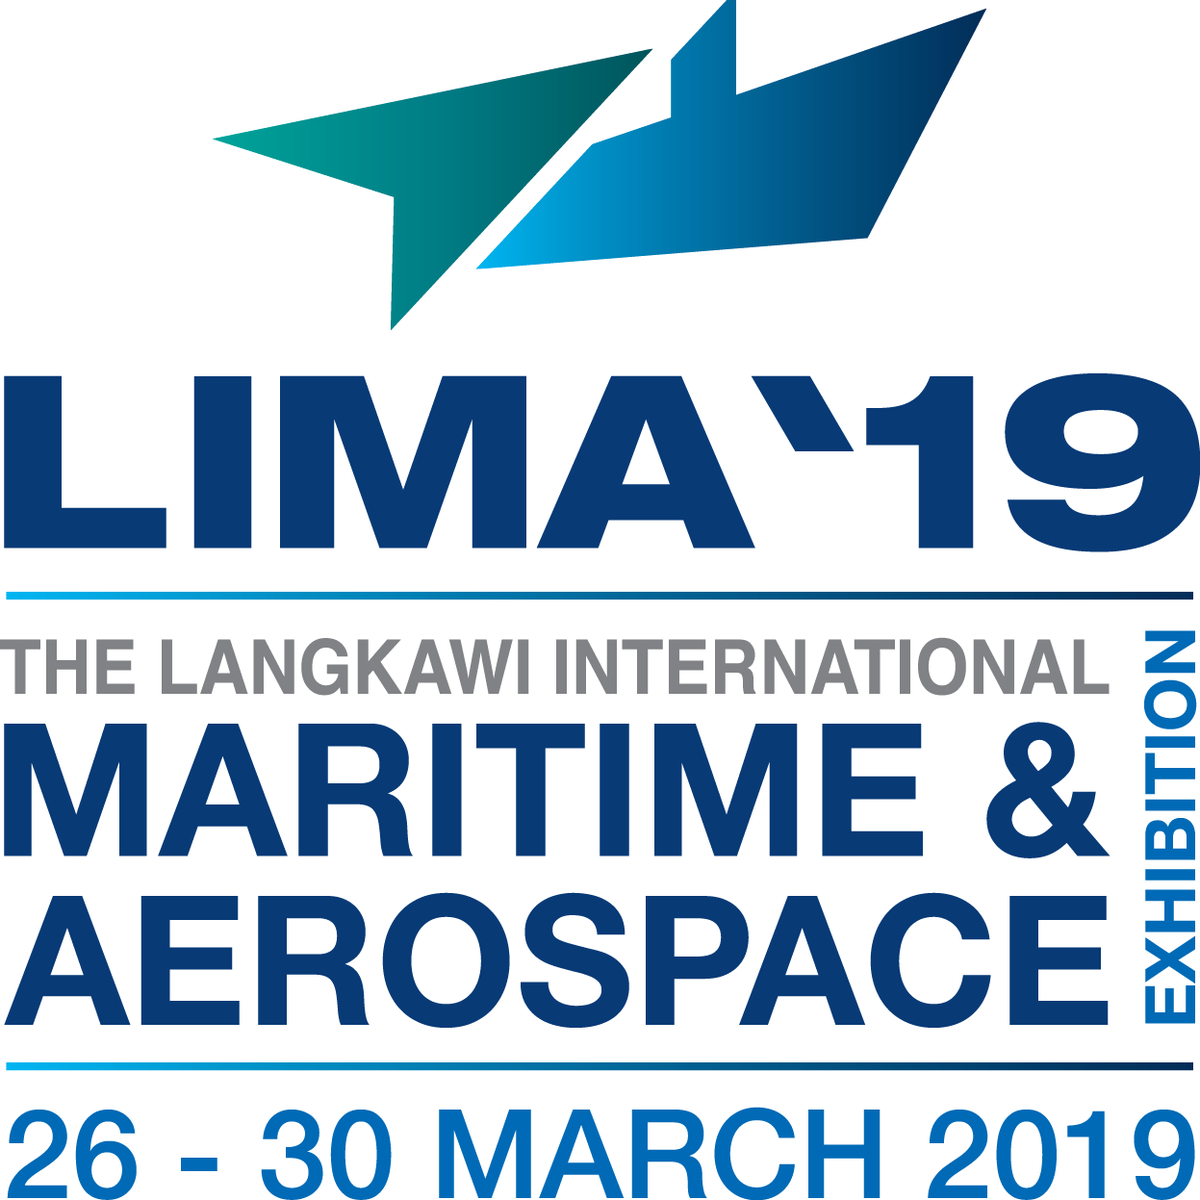 The Langkawi International Maritime and Aerospace Exhibition (LIMA`19) will be held from 26th to 30th March 2019 at The Mahsuri International Exhibition Centre (MIEC), Langkawi.

Visit Website limaexhibition.com for more info

#Kedah #Langkawi #LIMA19 #LebihHebat